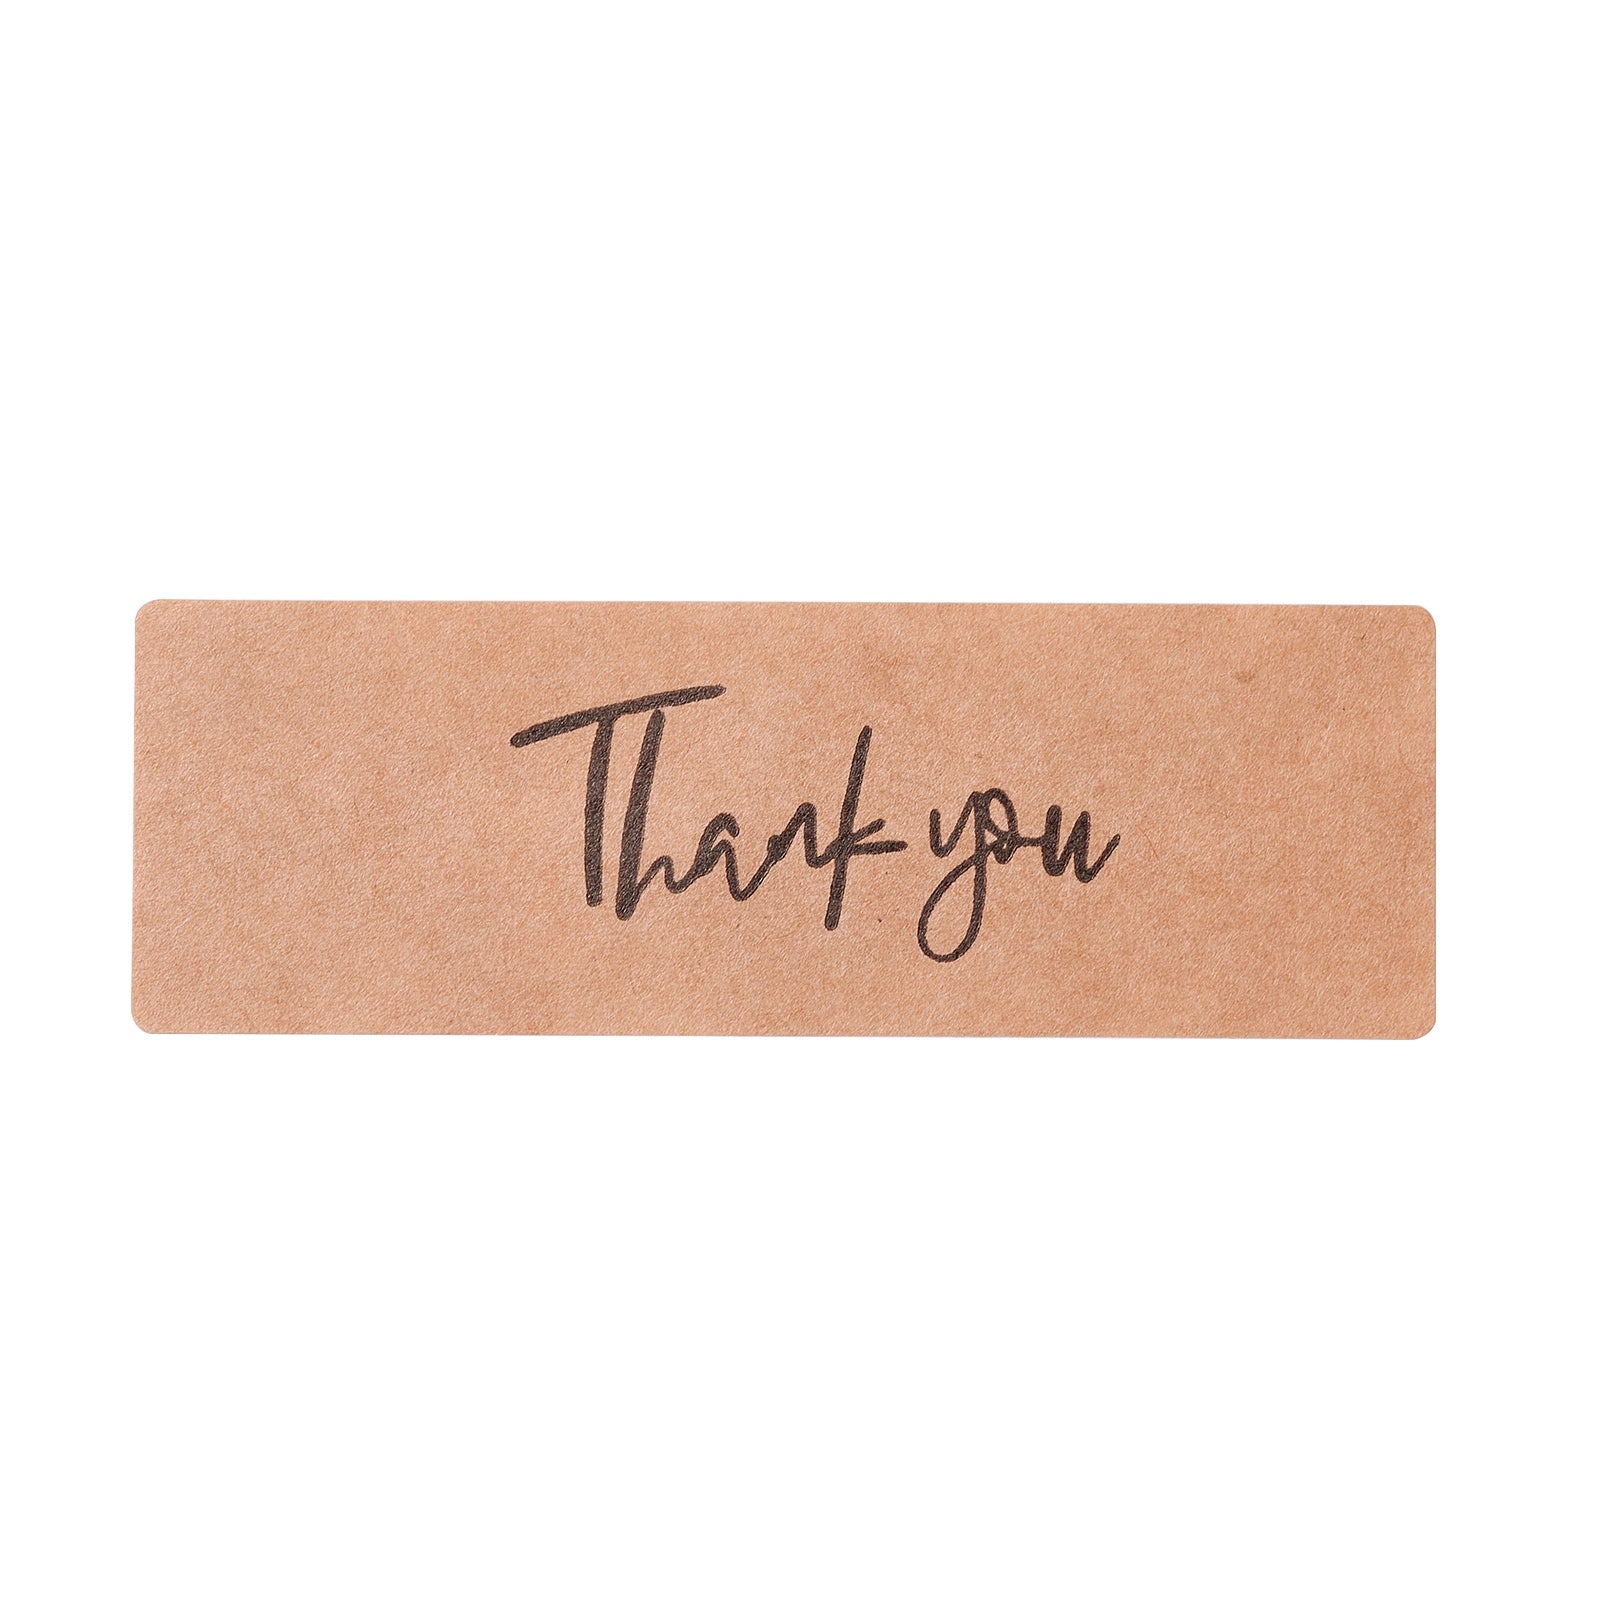 Thank You Oval Seal Labels, Stickers for Envelopes, Gifts, Cards